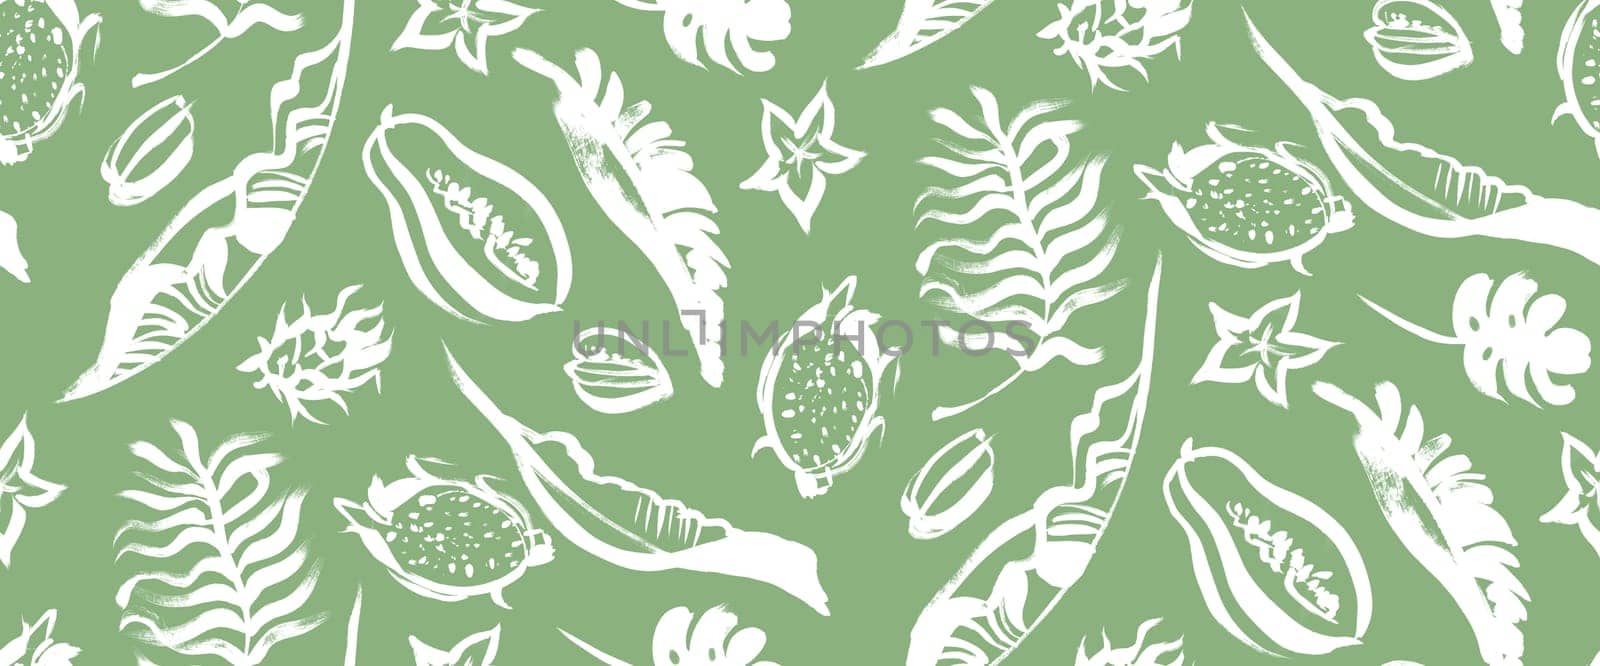 seamless summer tropical pattern with fruit and leave by MarinaVoyush